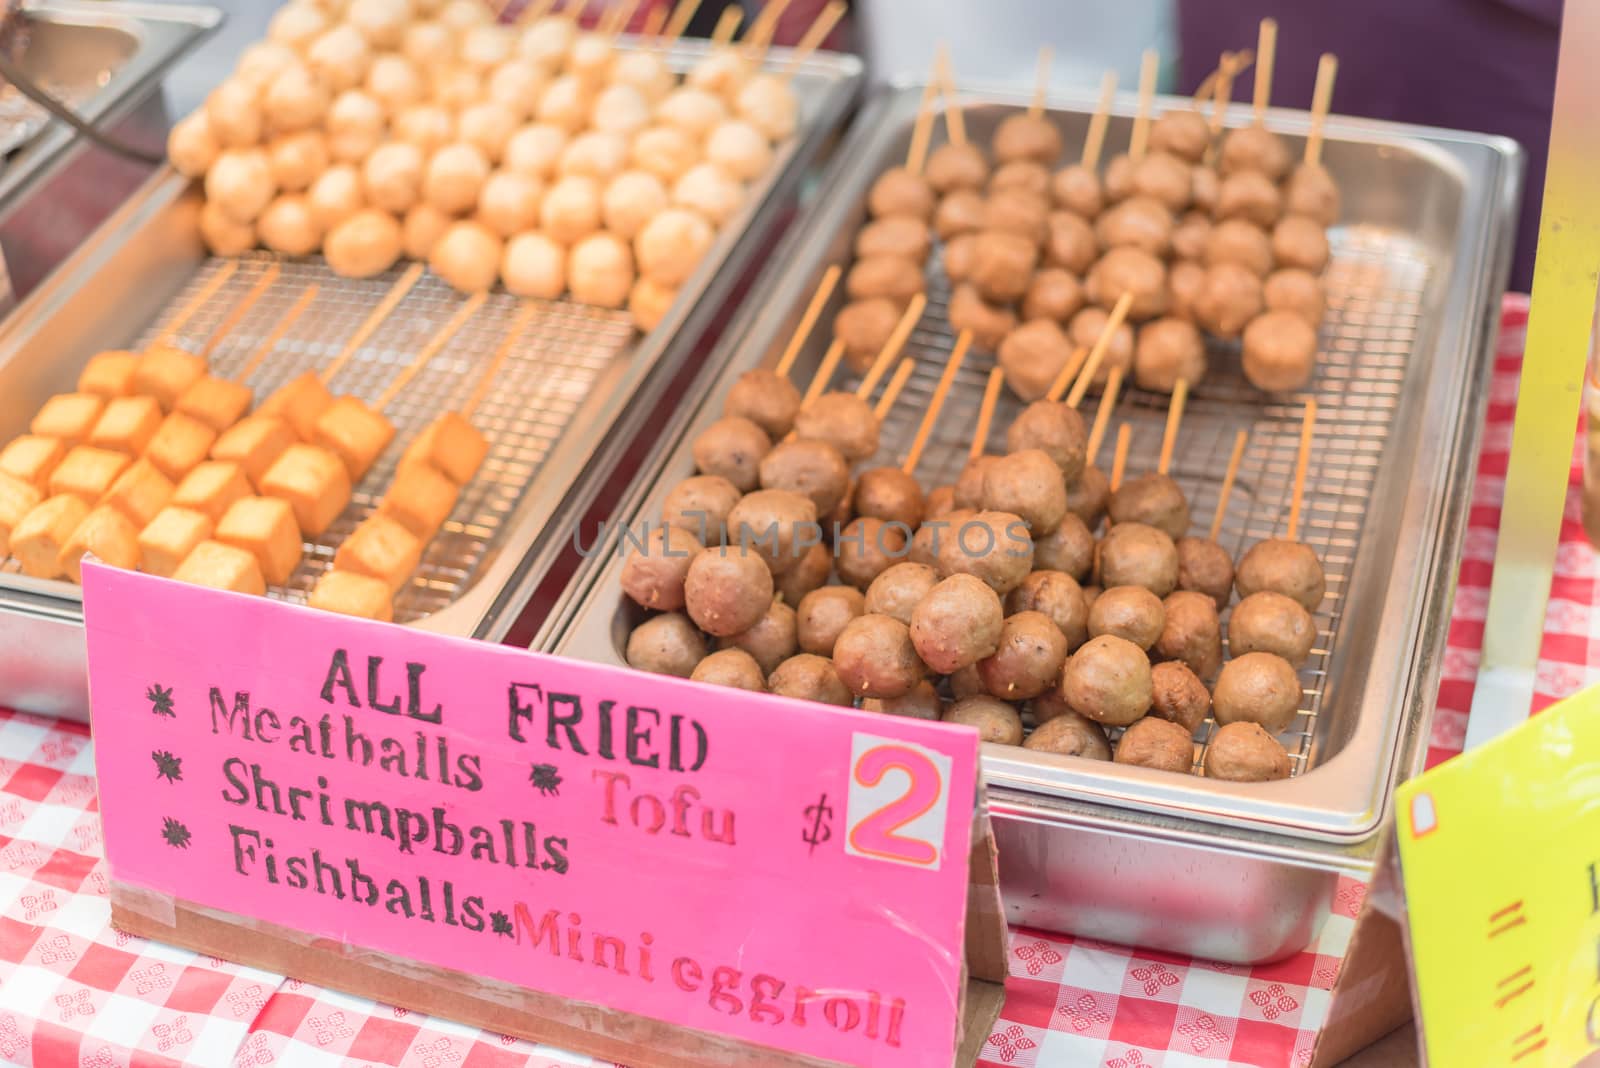 All fried, close-up, selective focus of skewers with fried meatballs, shrimp balls, fish balls, mini eggroll and tofu